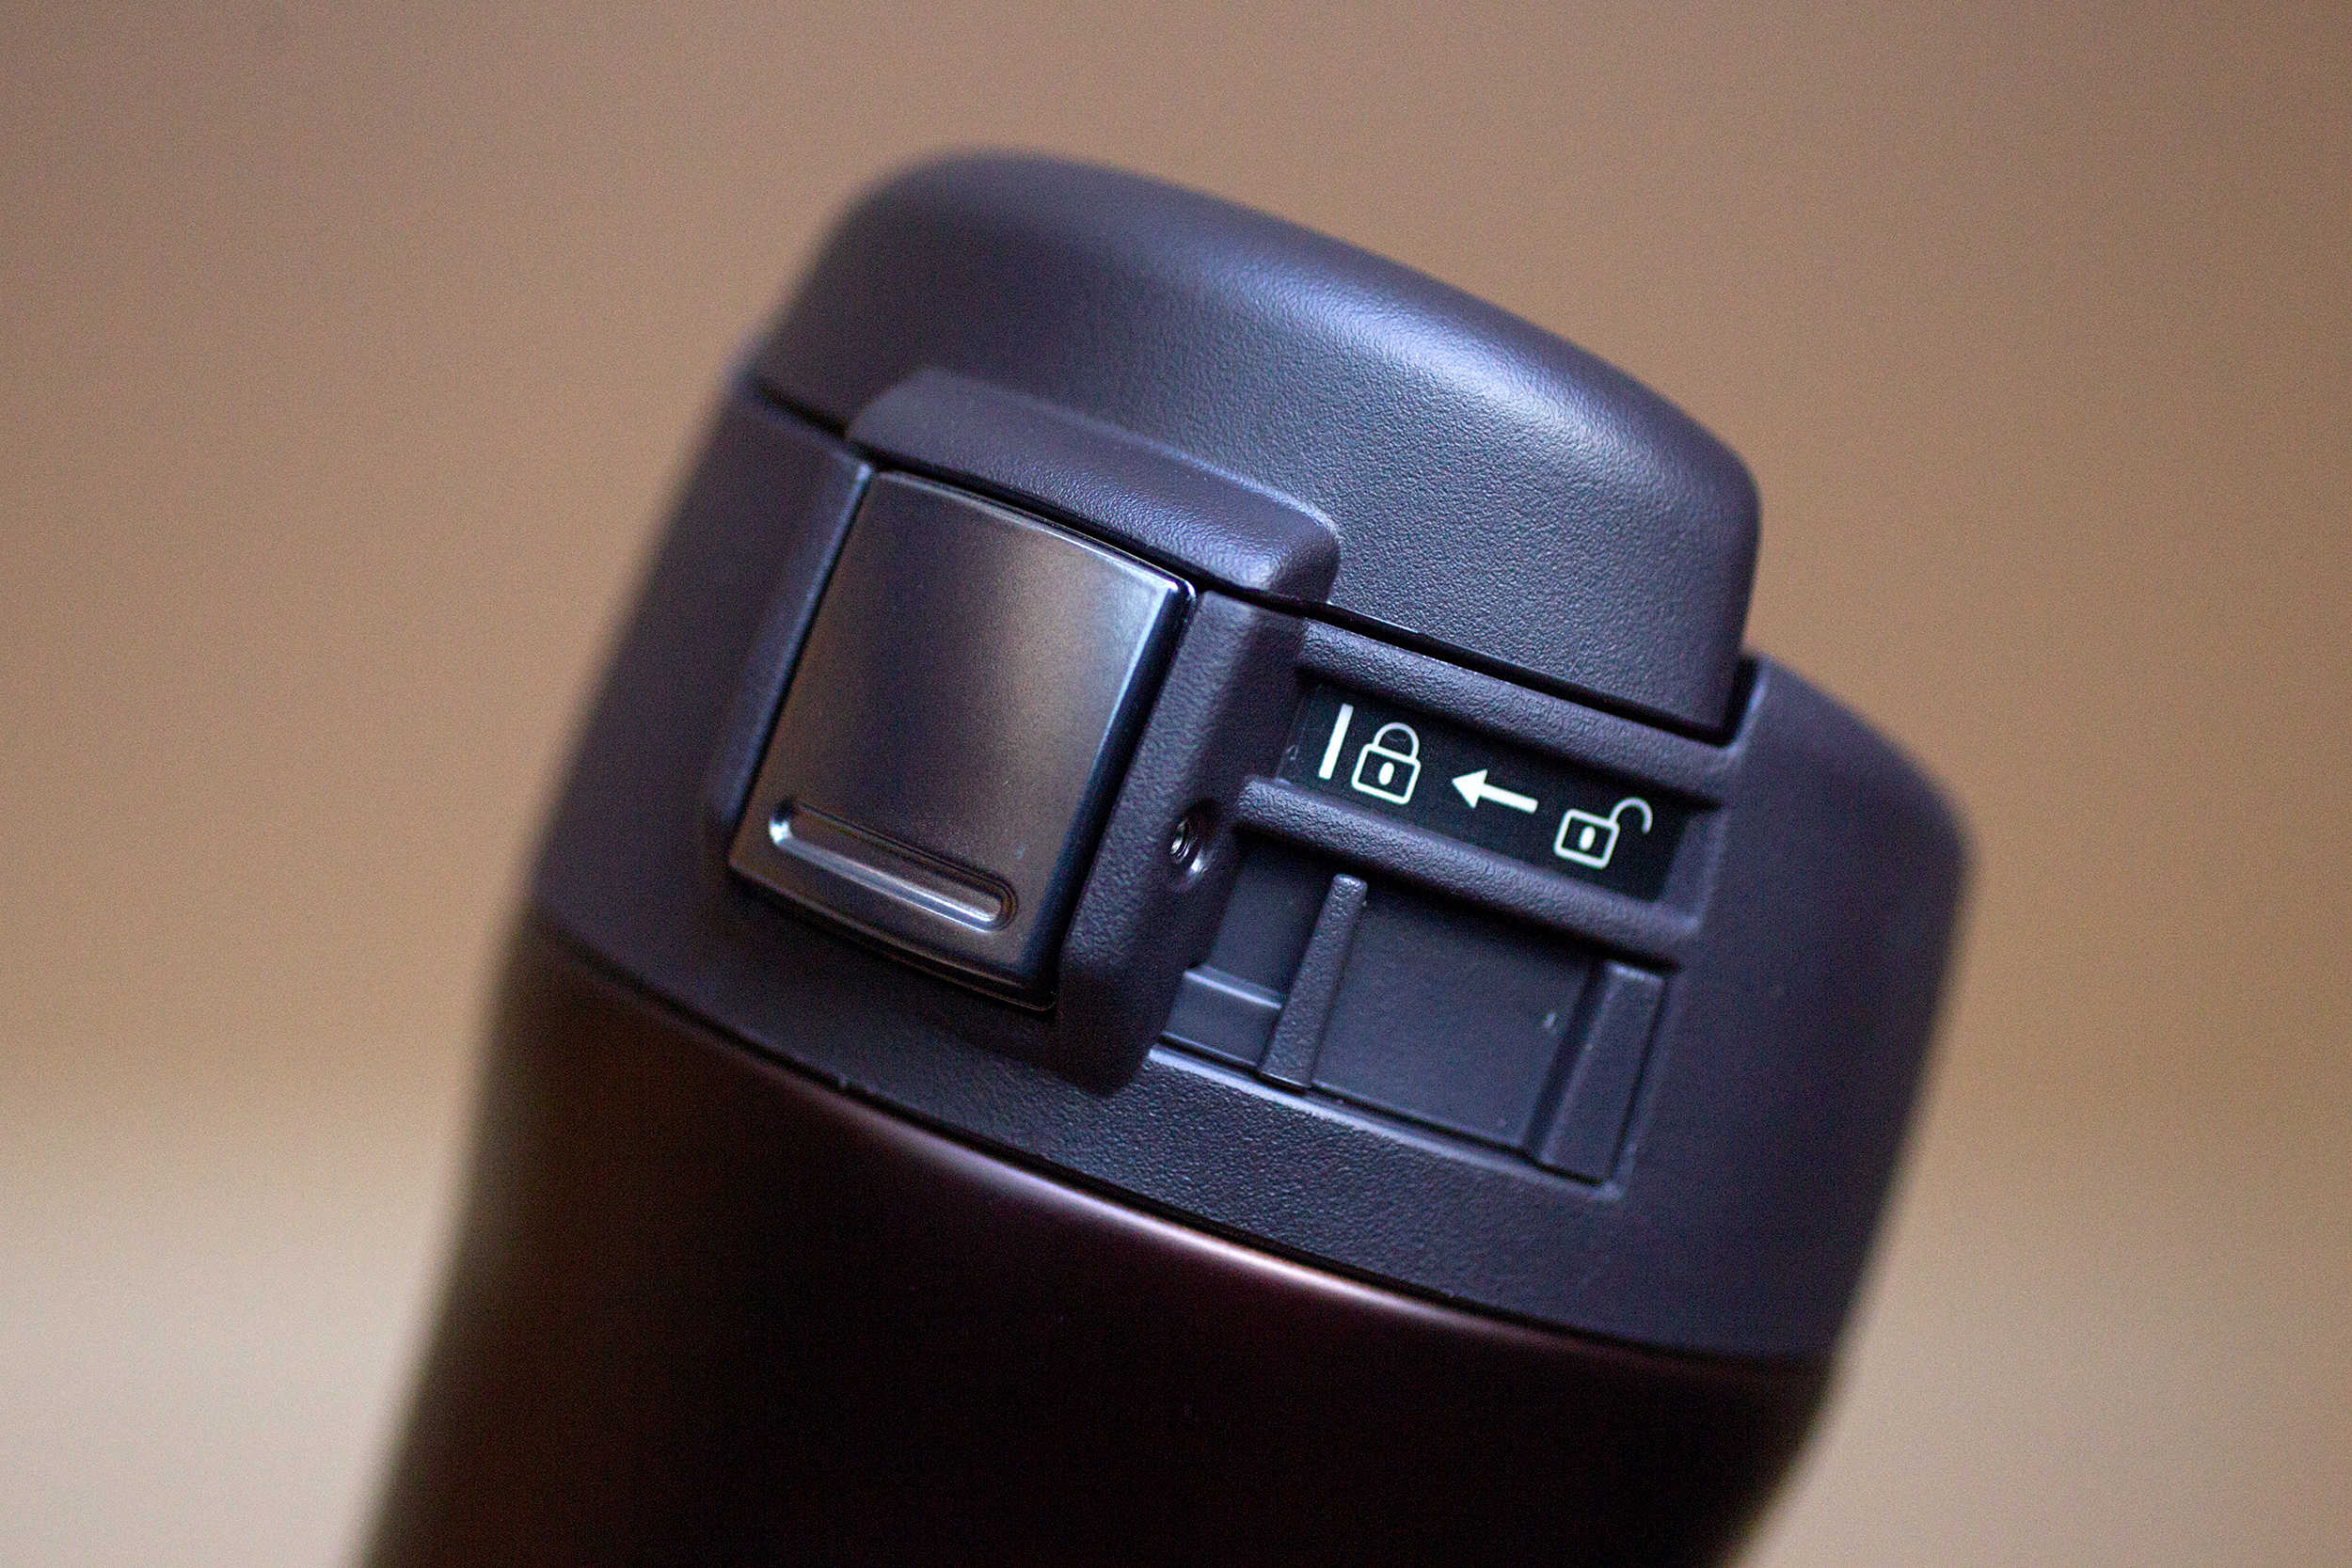 The Zojirushi travel mug will keep your coffee hot and contained.